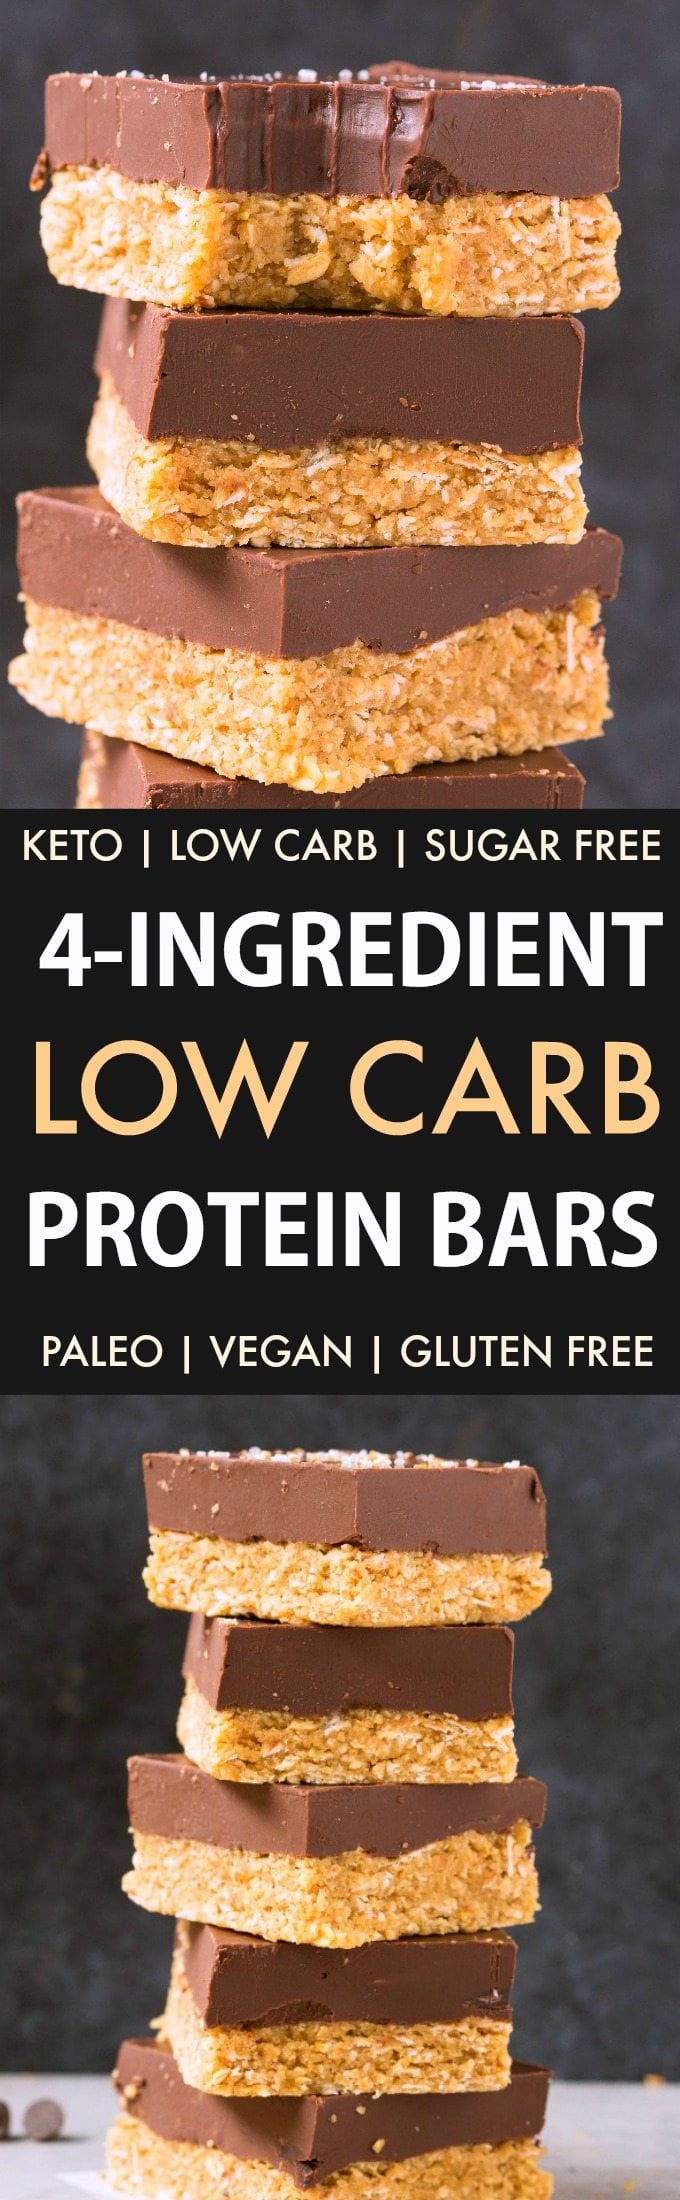 4-Ingredient No Bake Low Carb Protein Bars in a collage